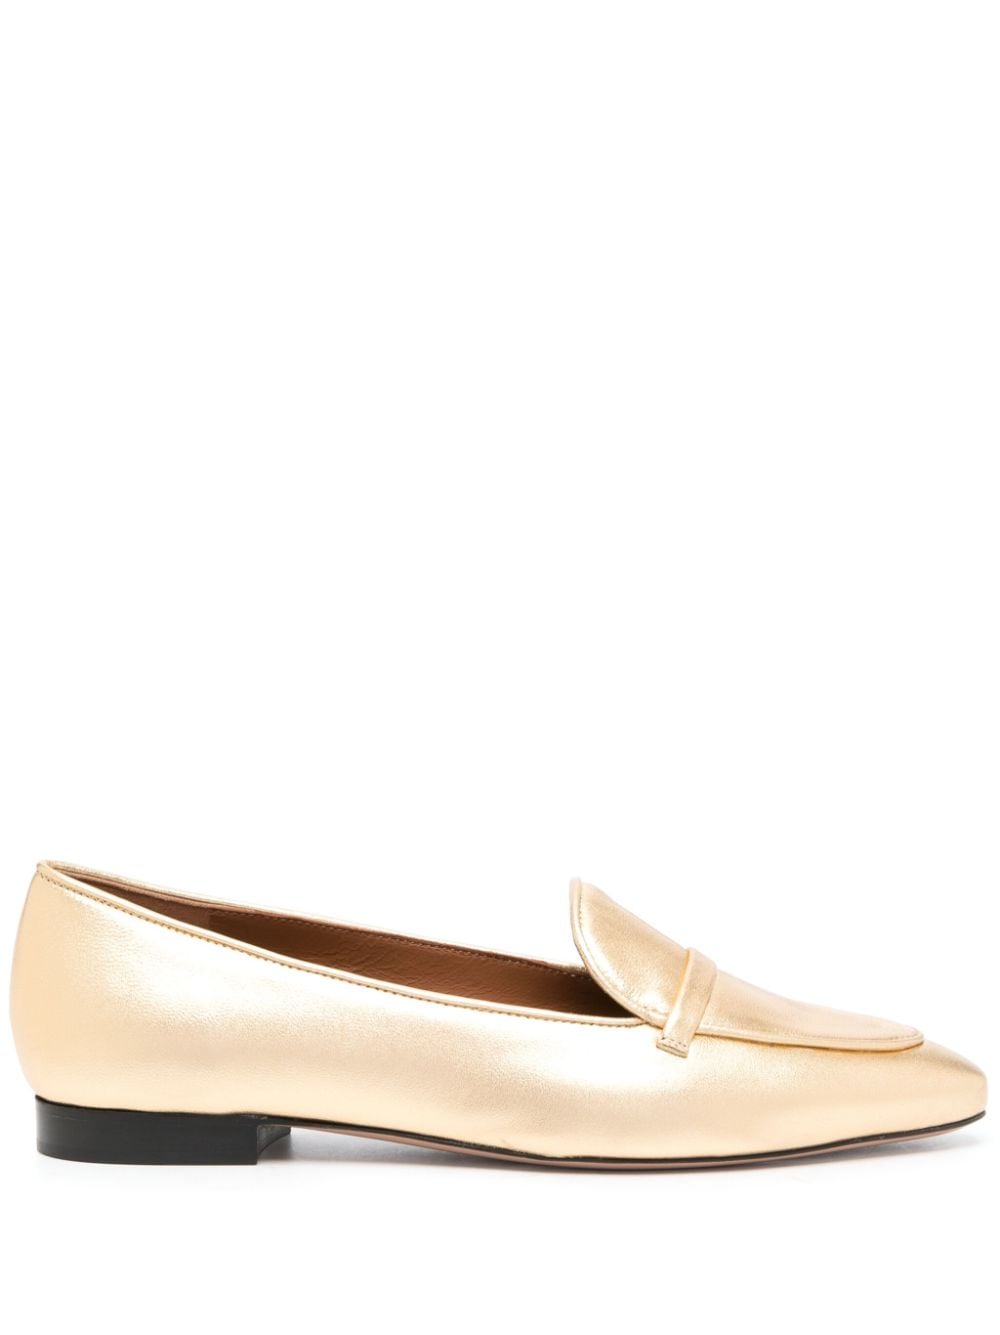 Malone Souliers Bruni metallic leather loafers - Gold von Malone Souliers